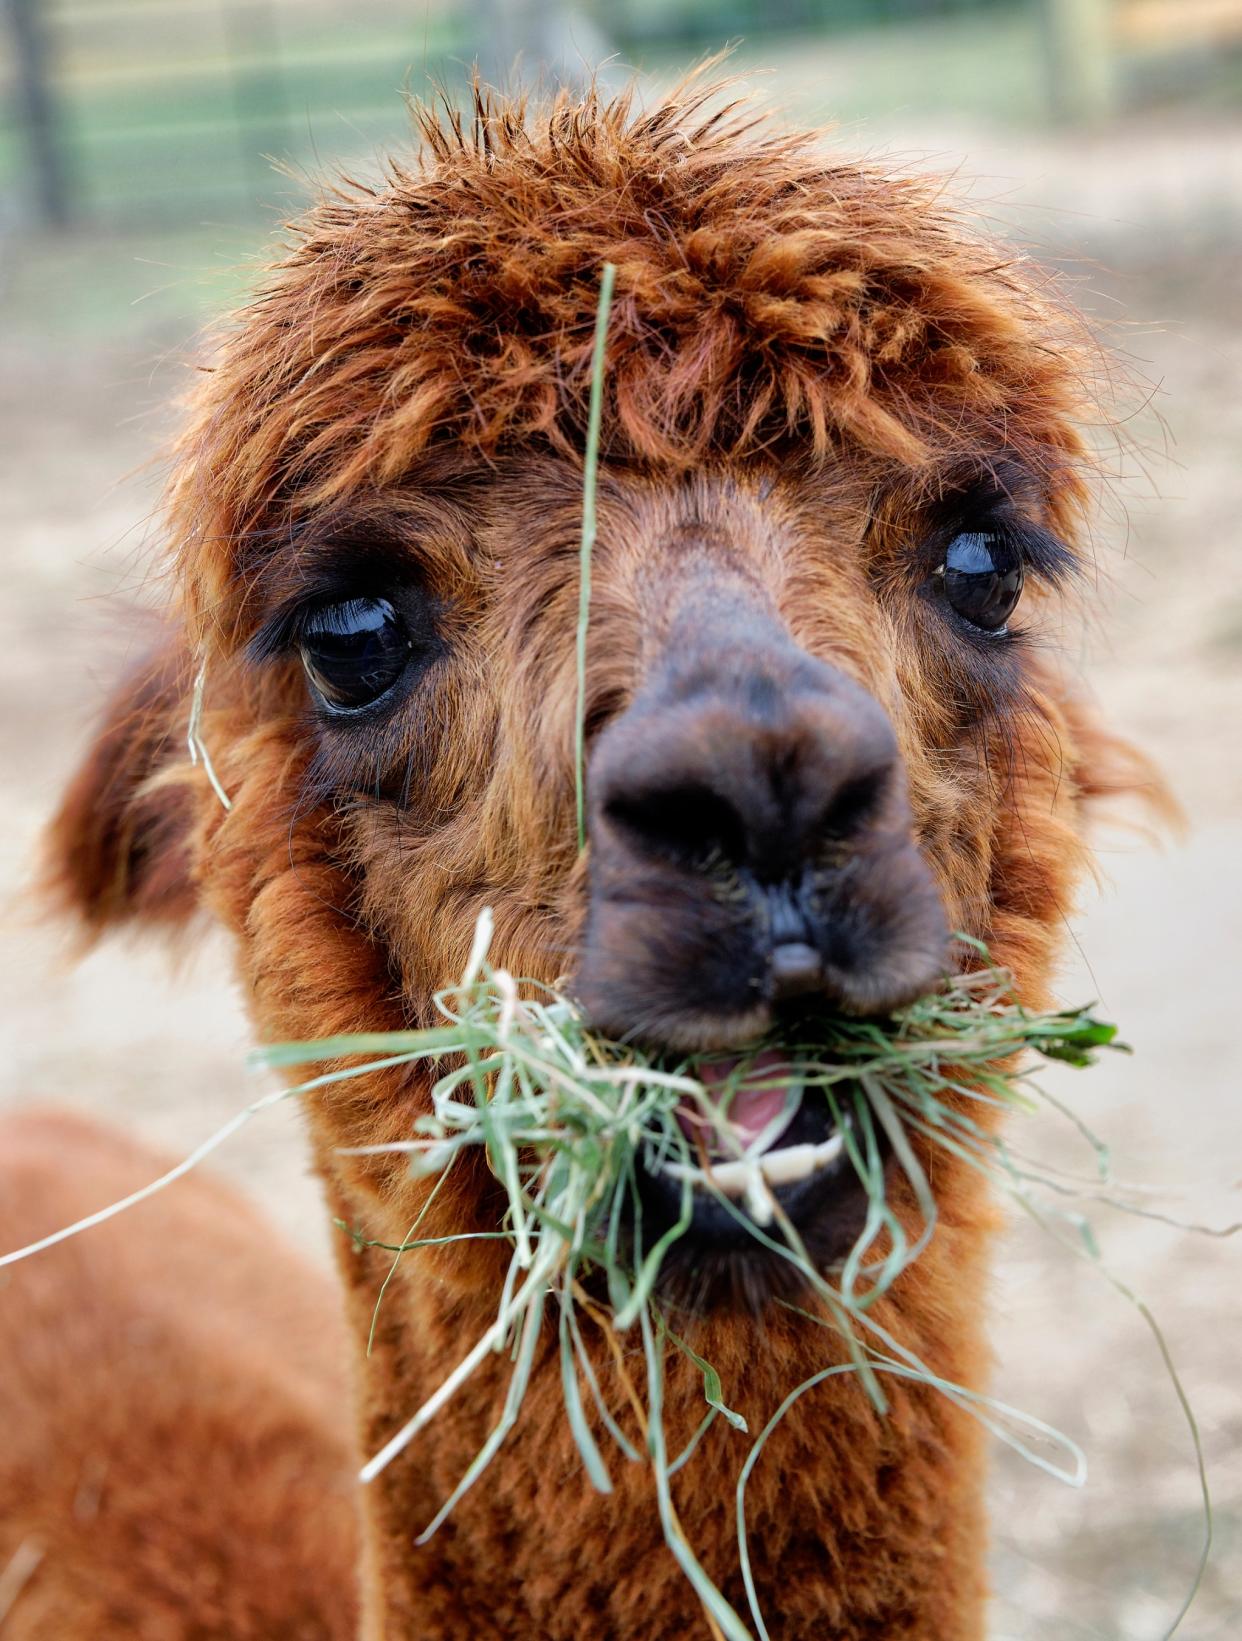 https://www.gettyimages.co.uk/detail/news-photo/alpaca-portrait-with-mouth-full-of-hay-news-photo/454437287